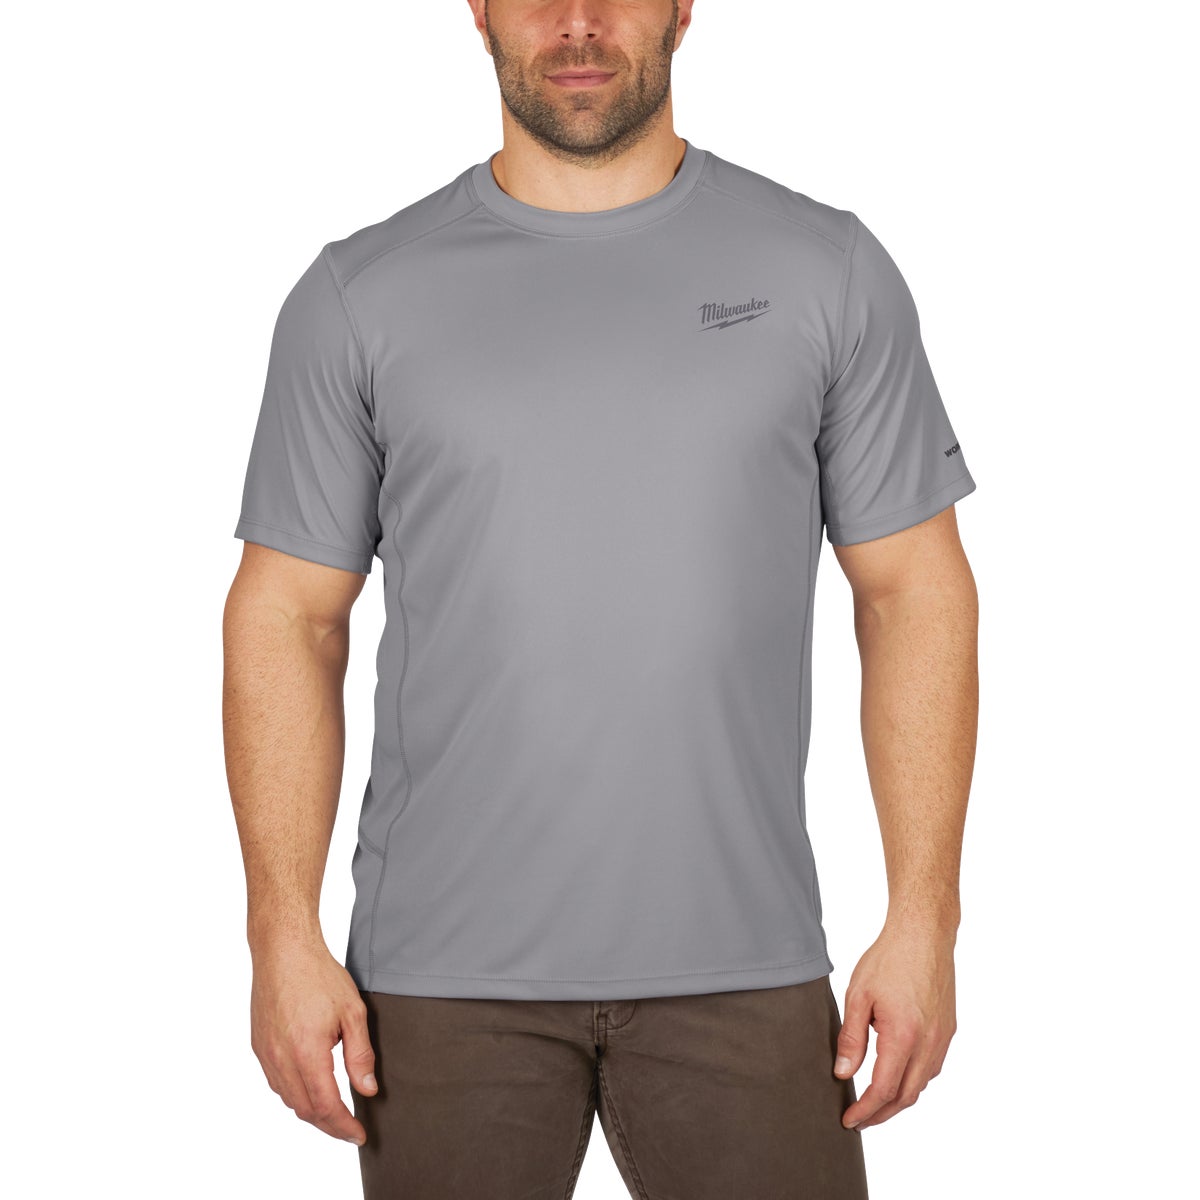 Item 700238, Durable lightweight shirt designed for tradesmen who need a next-to-skin 